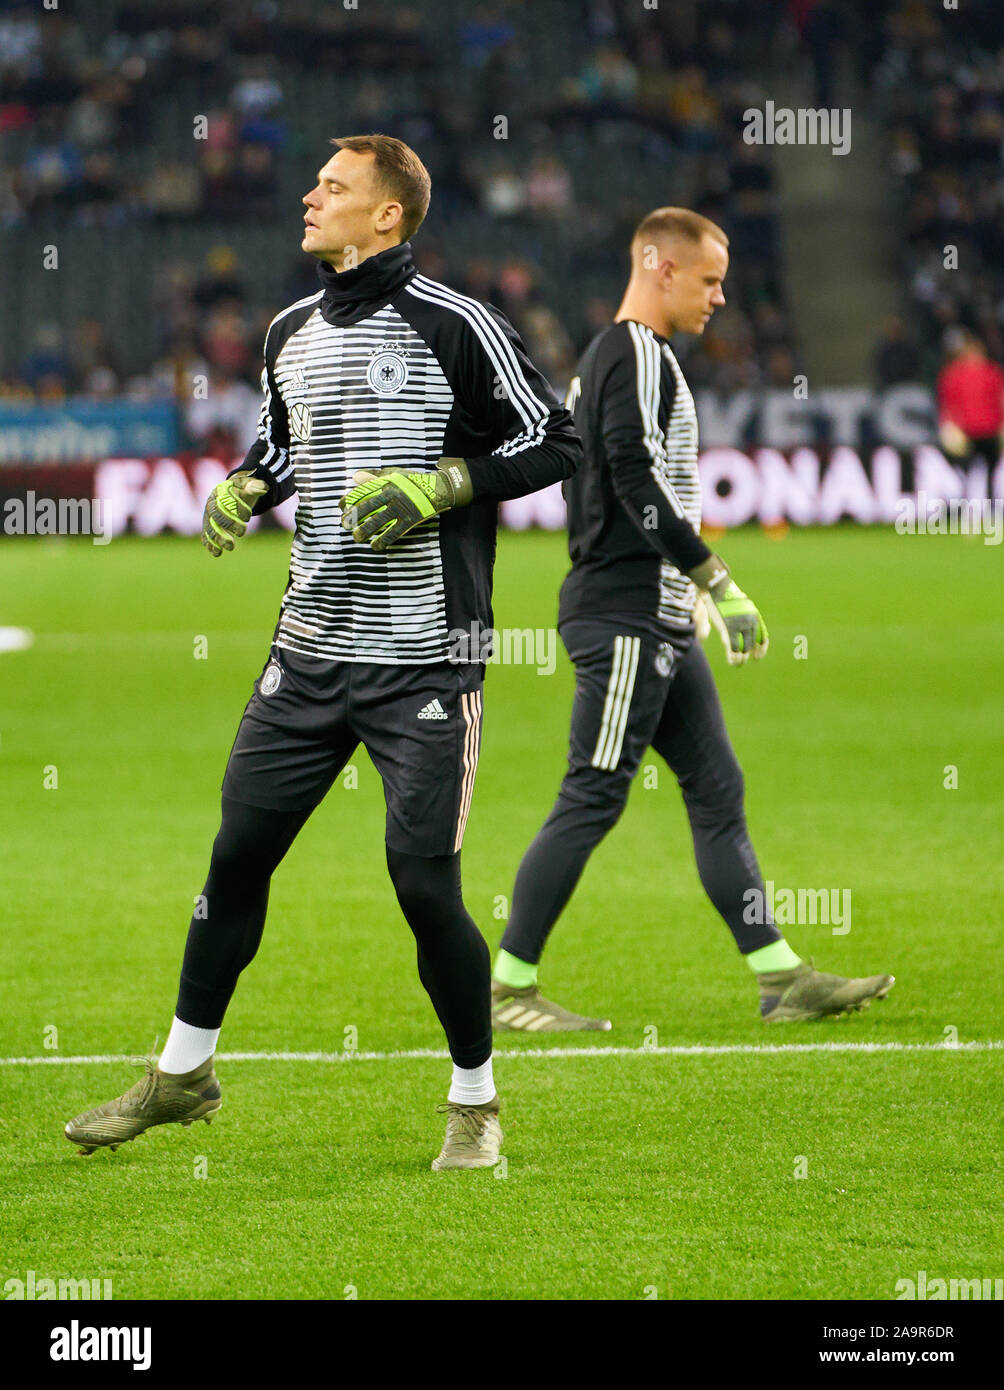 Mönchengladbach, Germany. 16th Nov 2019. EURO QUALI 2020, Germany-Belarus, Mönchengladbach Nov 16, 2019. Manuel NEUER, DFB 1 goalkeeper, Marc-Andre TER STEGEN, goal keeper DFB 22  GERMANY - BELARUS 4-0 Important: DFB regulations prohibit any use of photographs as image sequences and/or quasi-video.  Qualification for European Championships, EM Quali,  2020 Season 2019/2020,  November 16, 2019  in Mönchengladbach, Germany. © Peter Schatz / Alamy Live News Stock Photo